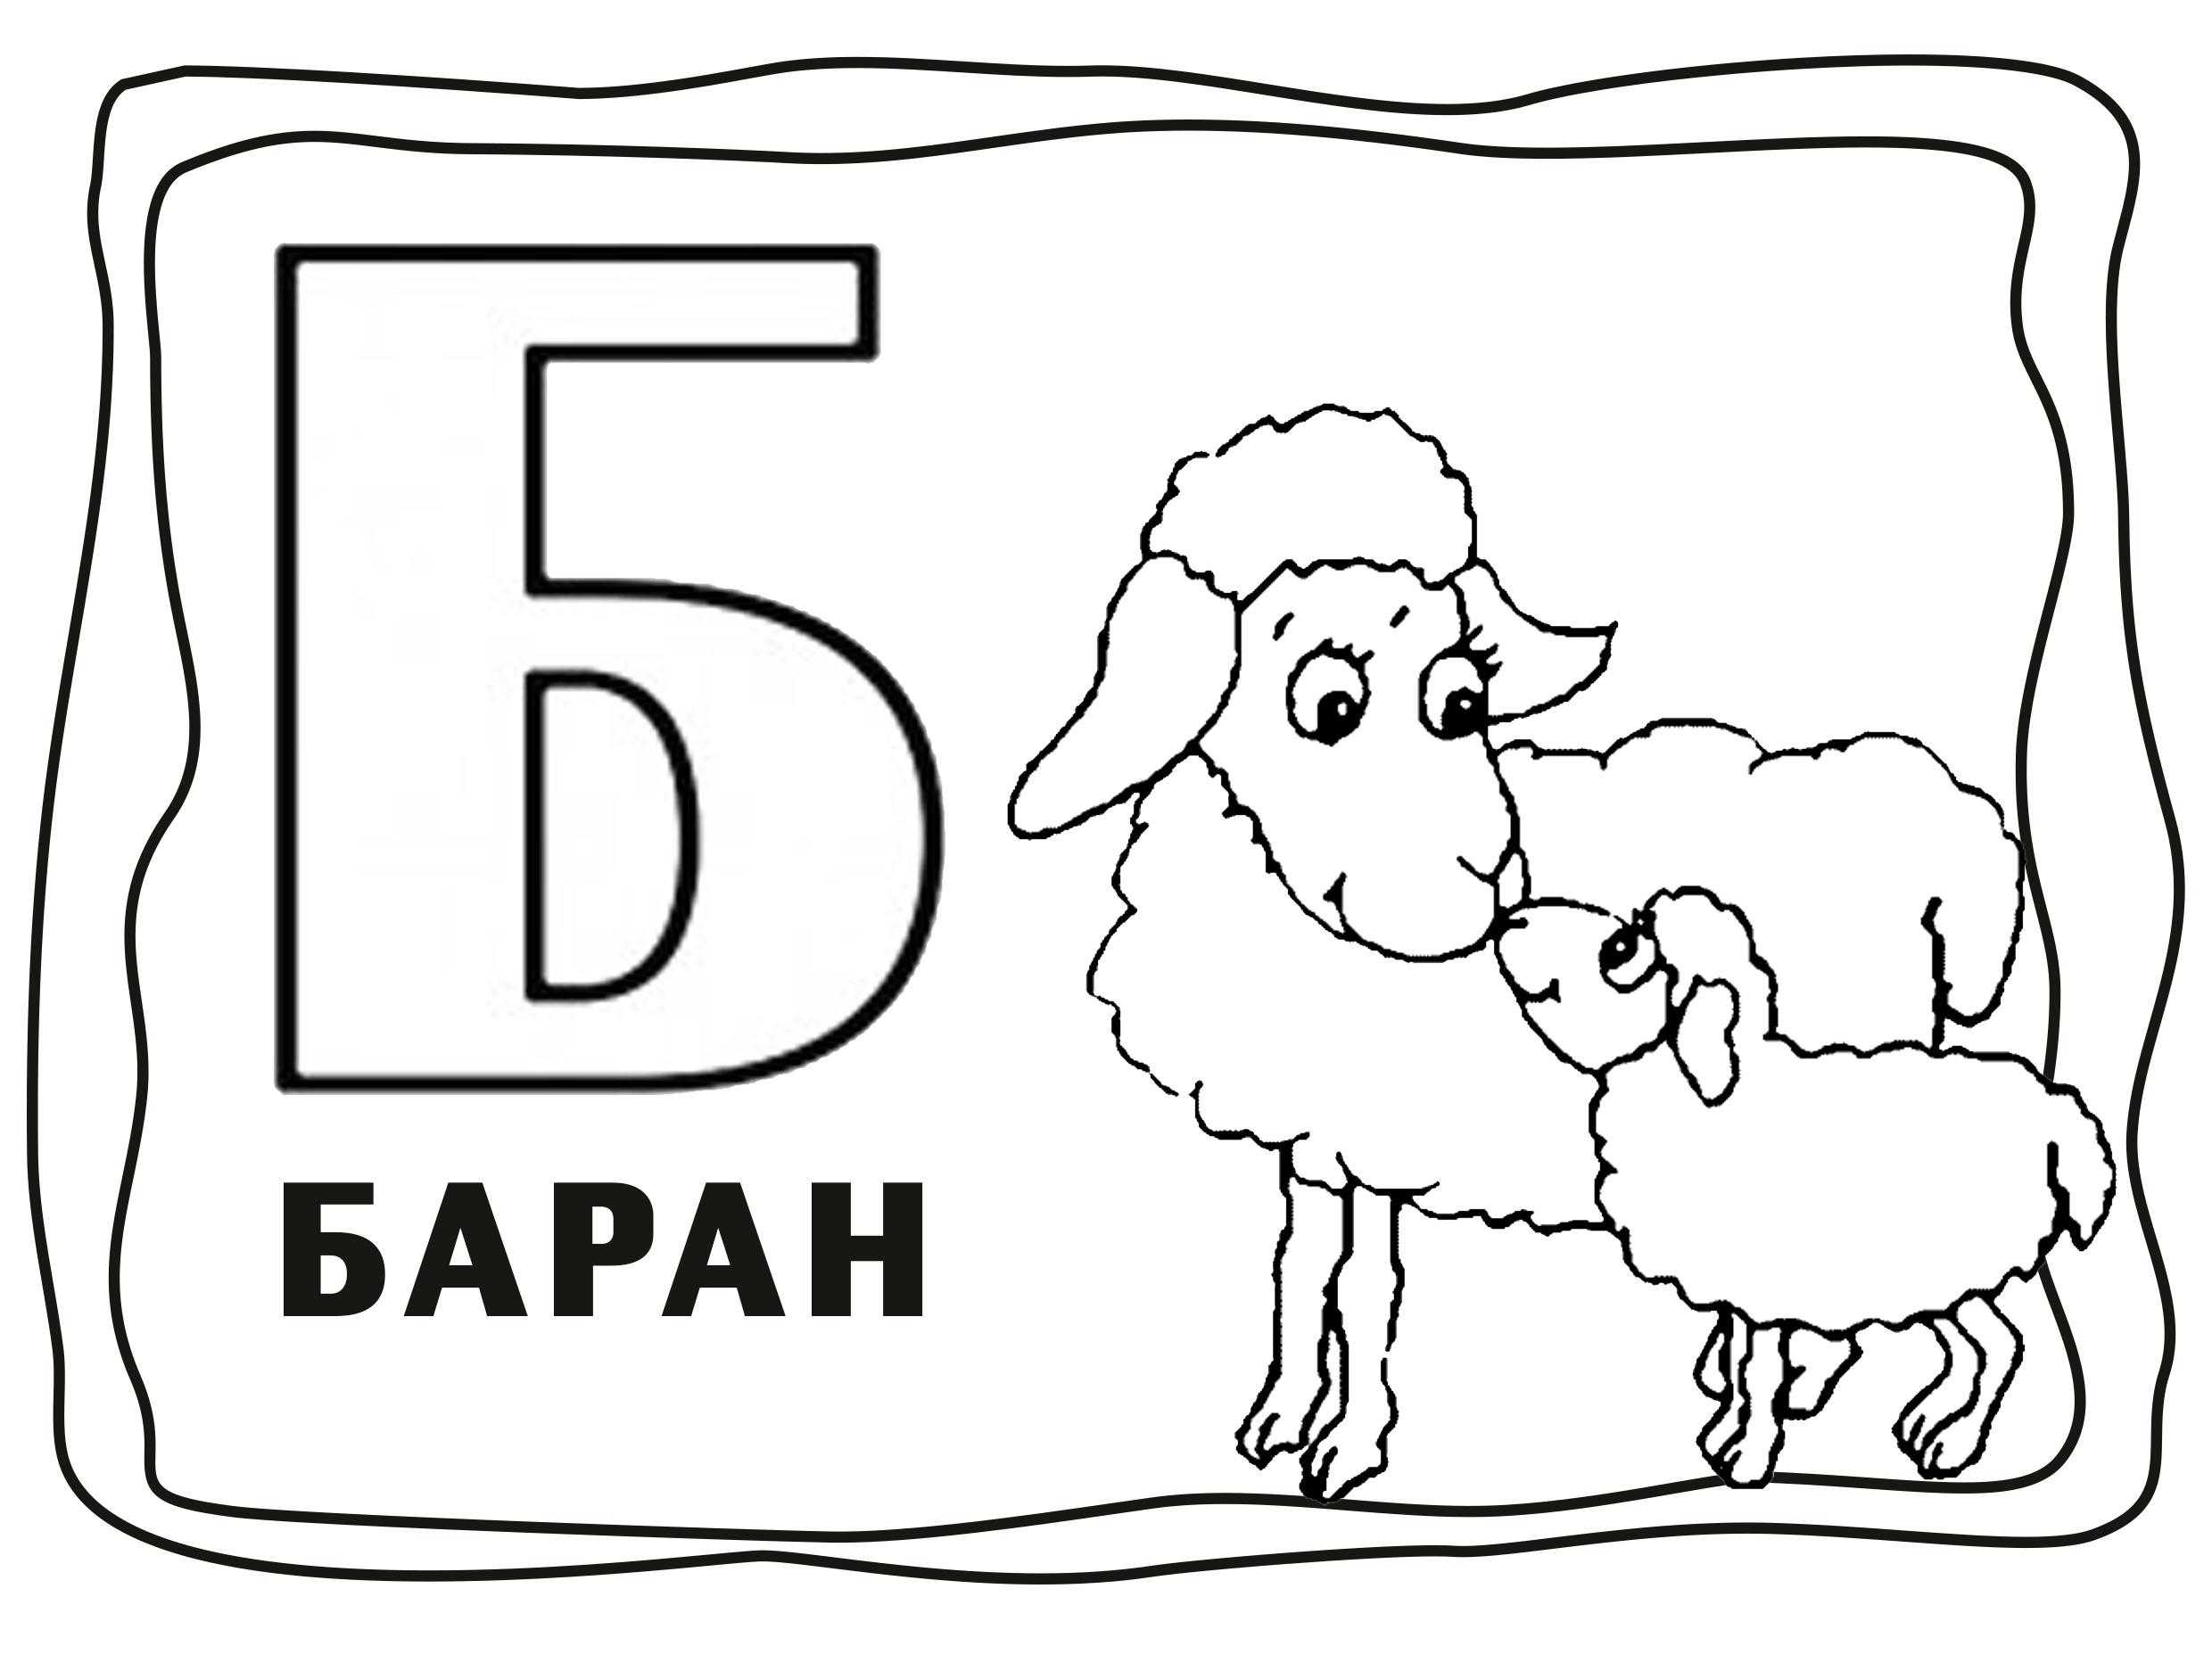 Coloring The sheep and the letter b. Category Pets allowed. Tags:  RAM.